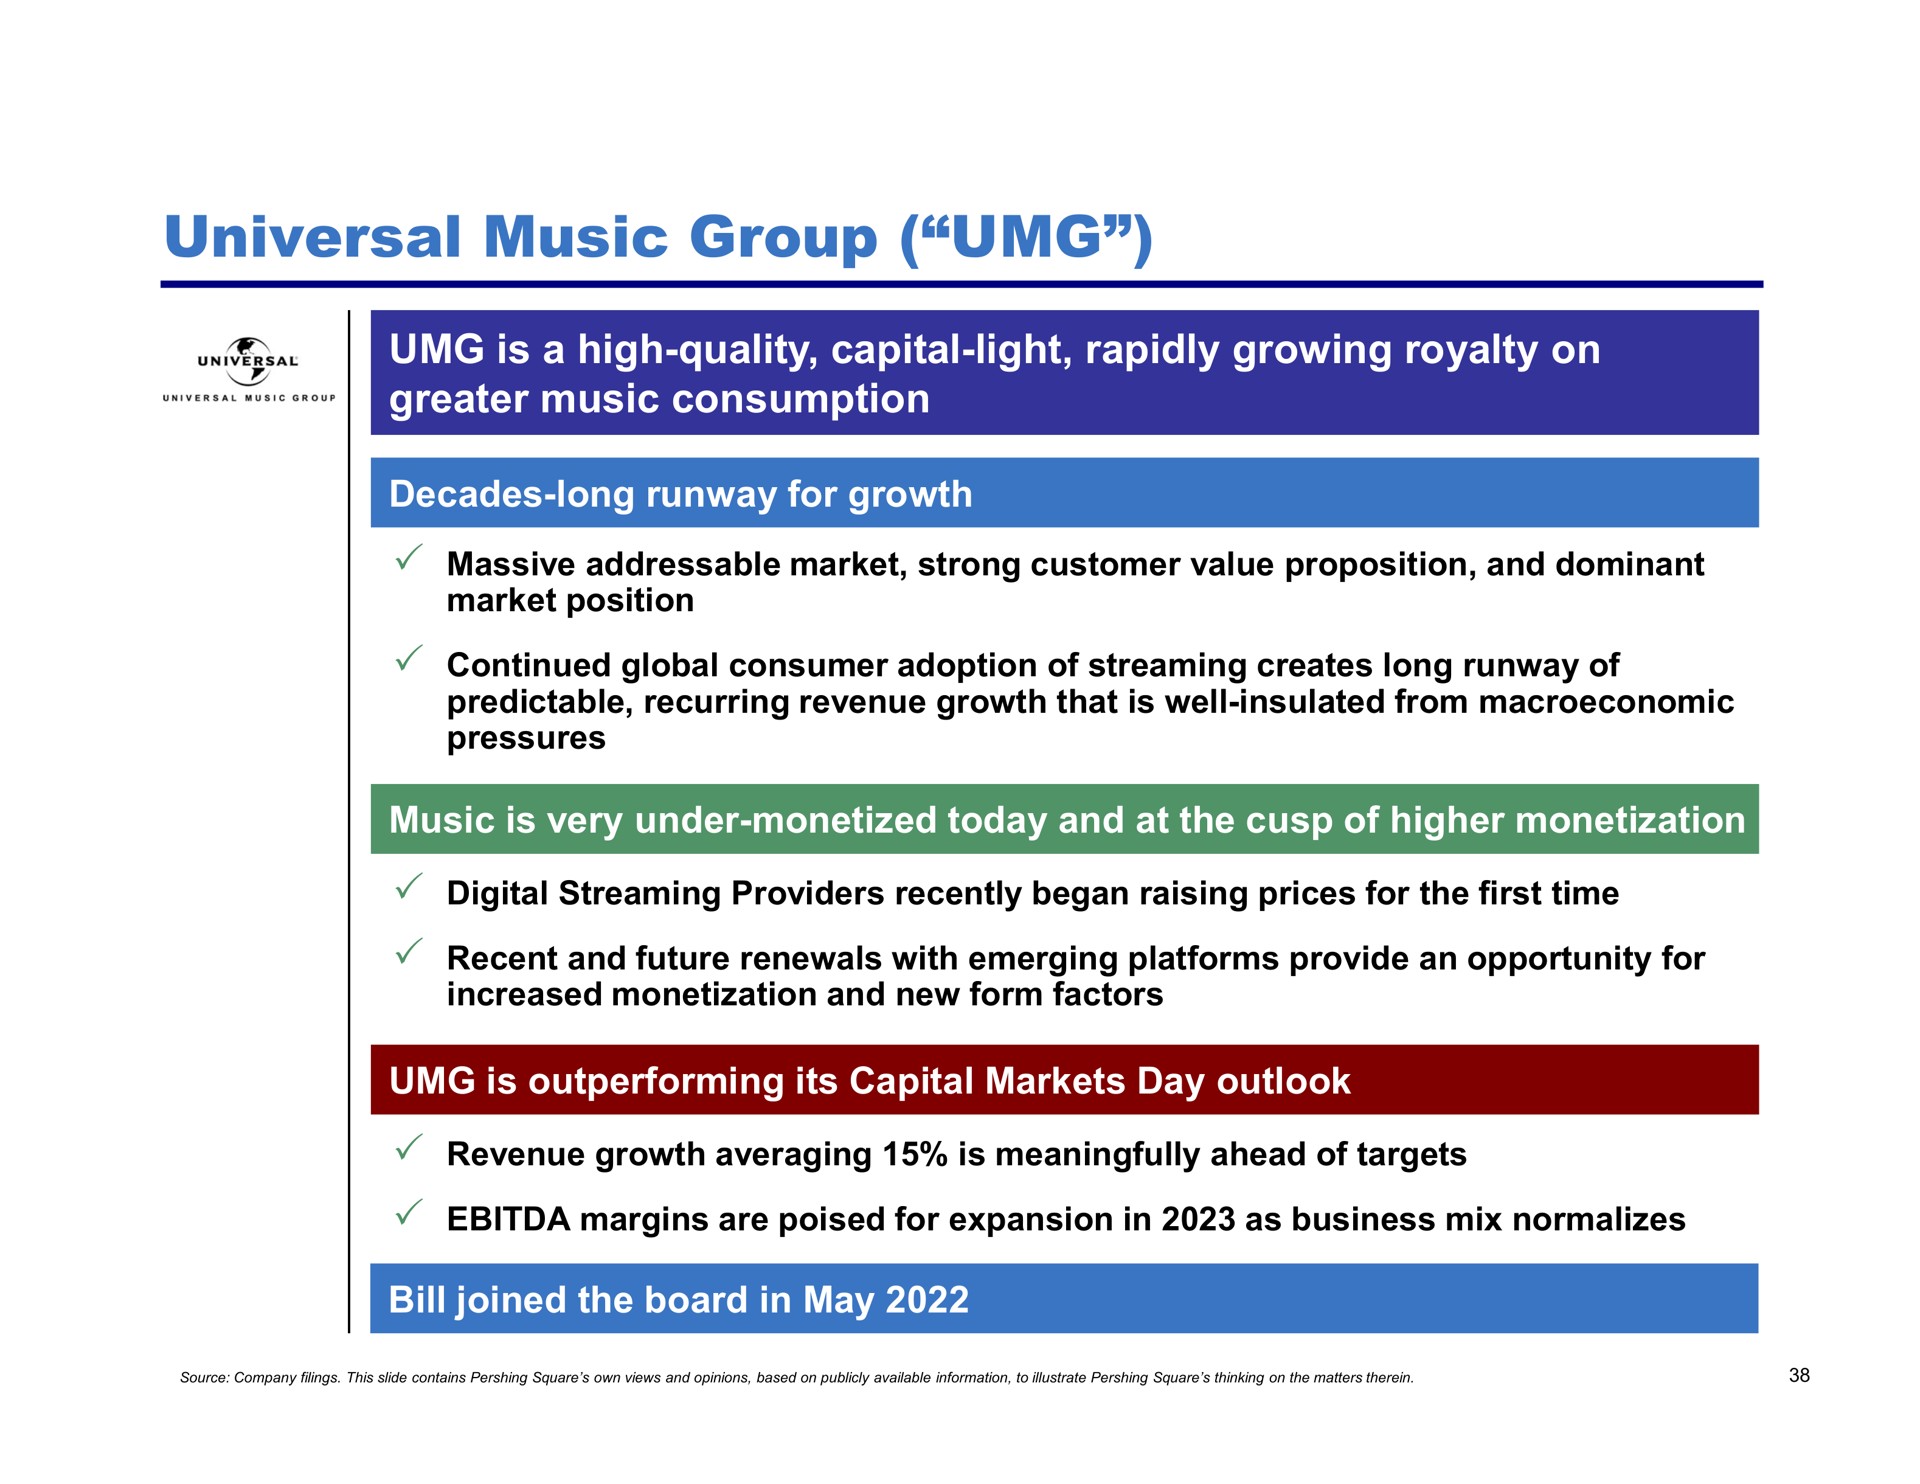 universal music group is a high quality capital light rapidly growing royalty on greater music consumption | Pershing Square